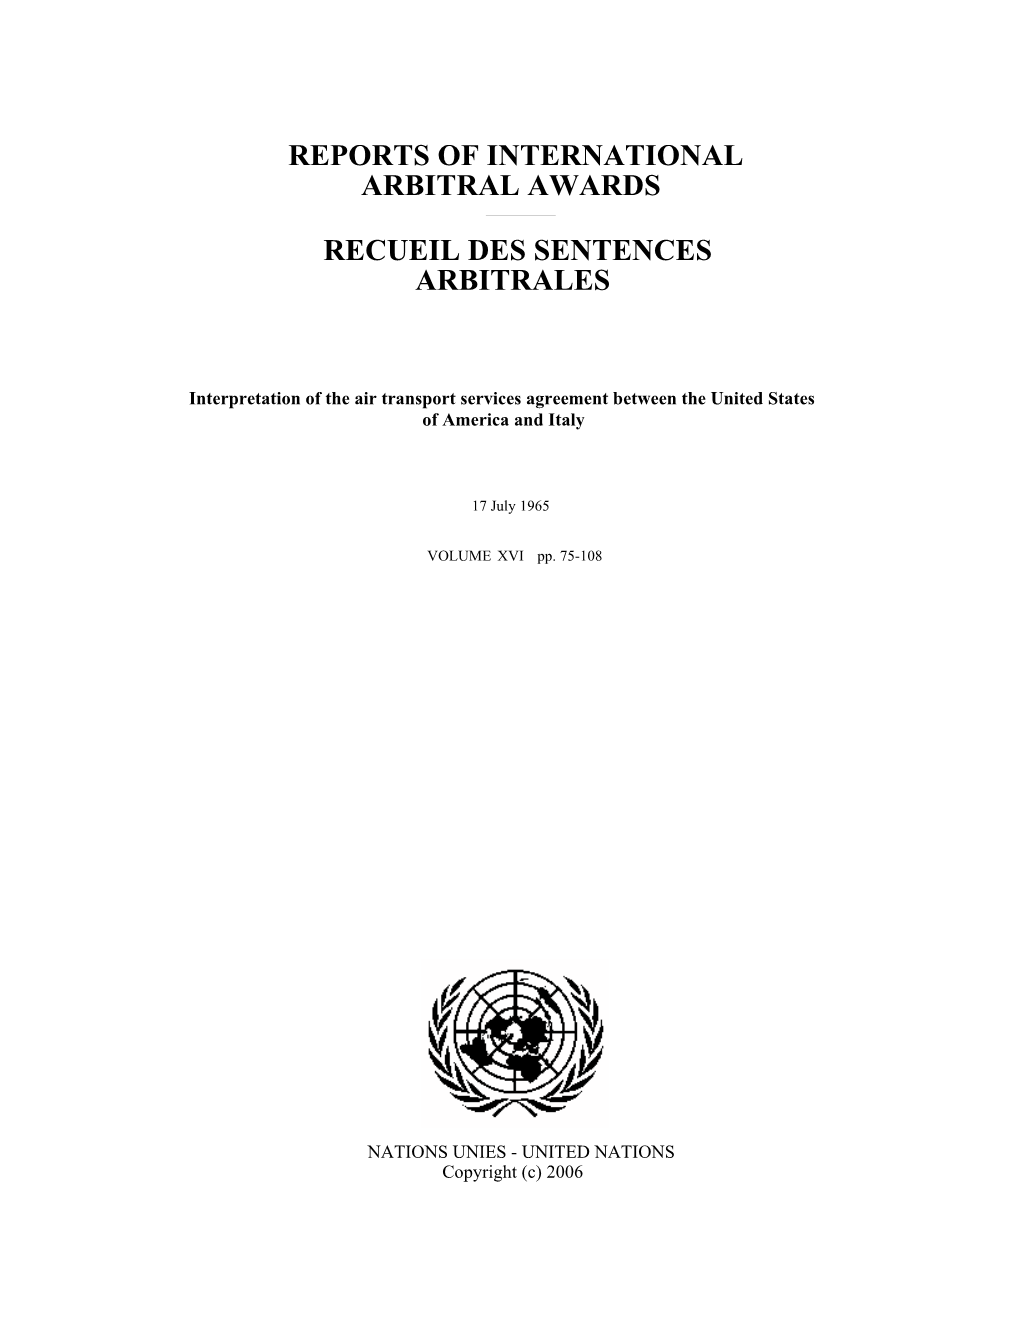 Interpretation of the Air Transport Services Agreement Between the United States of America and Italy